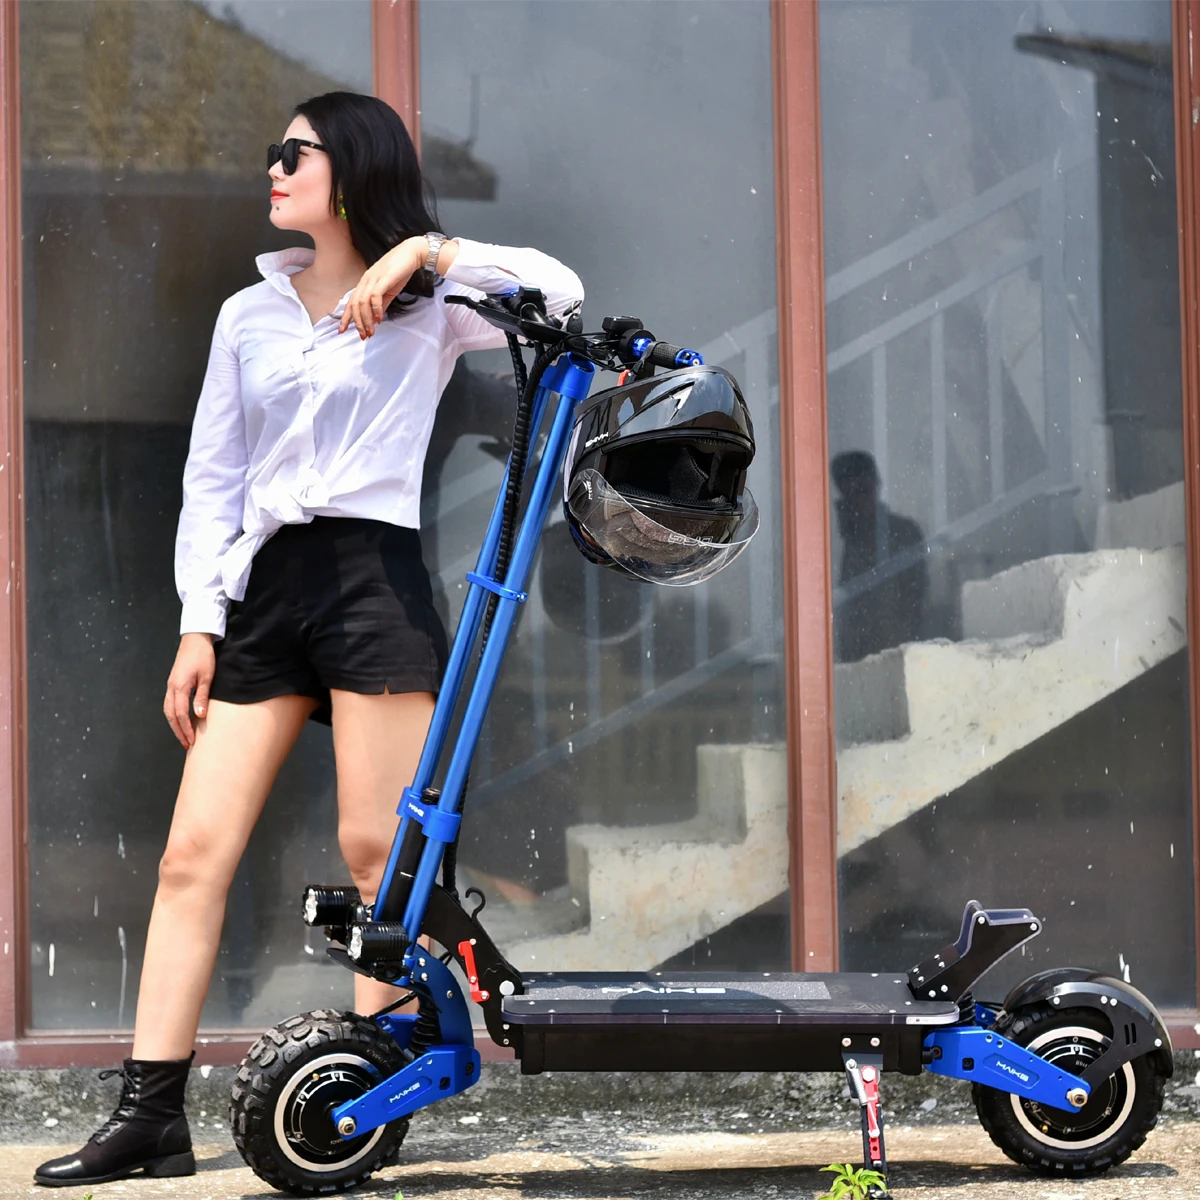 

China Good Price Maike kk10s pro 5600w motor scooter 90-110km adult 11 inch wide wheel electric scooter off road